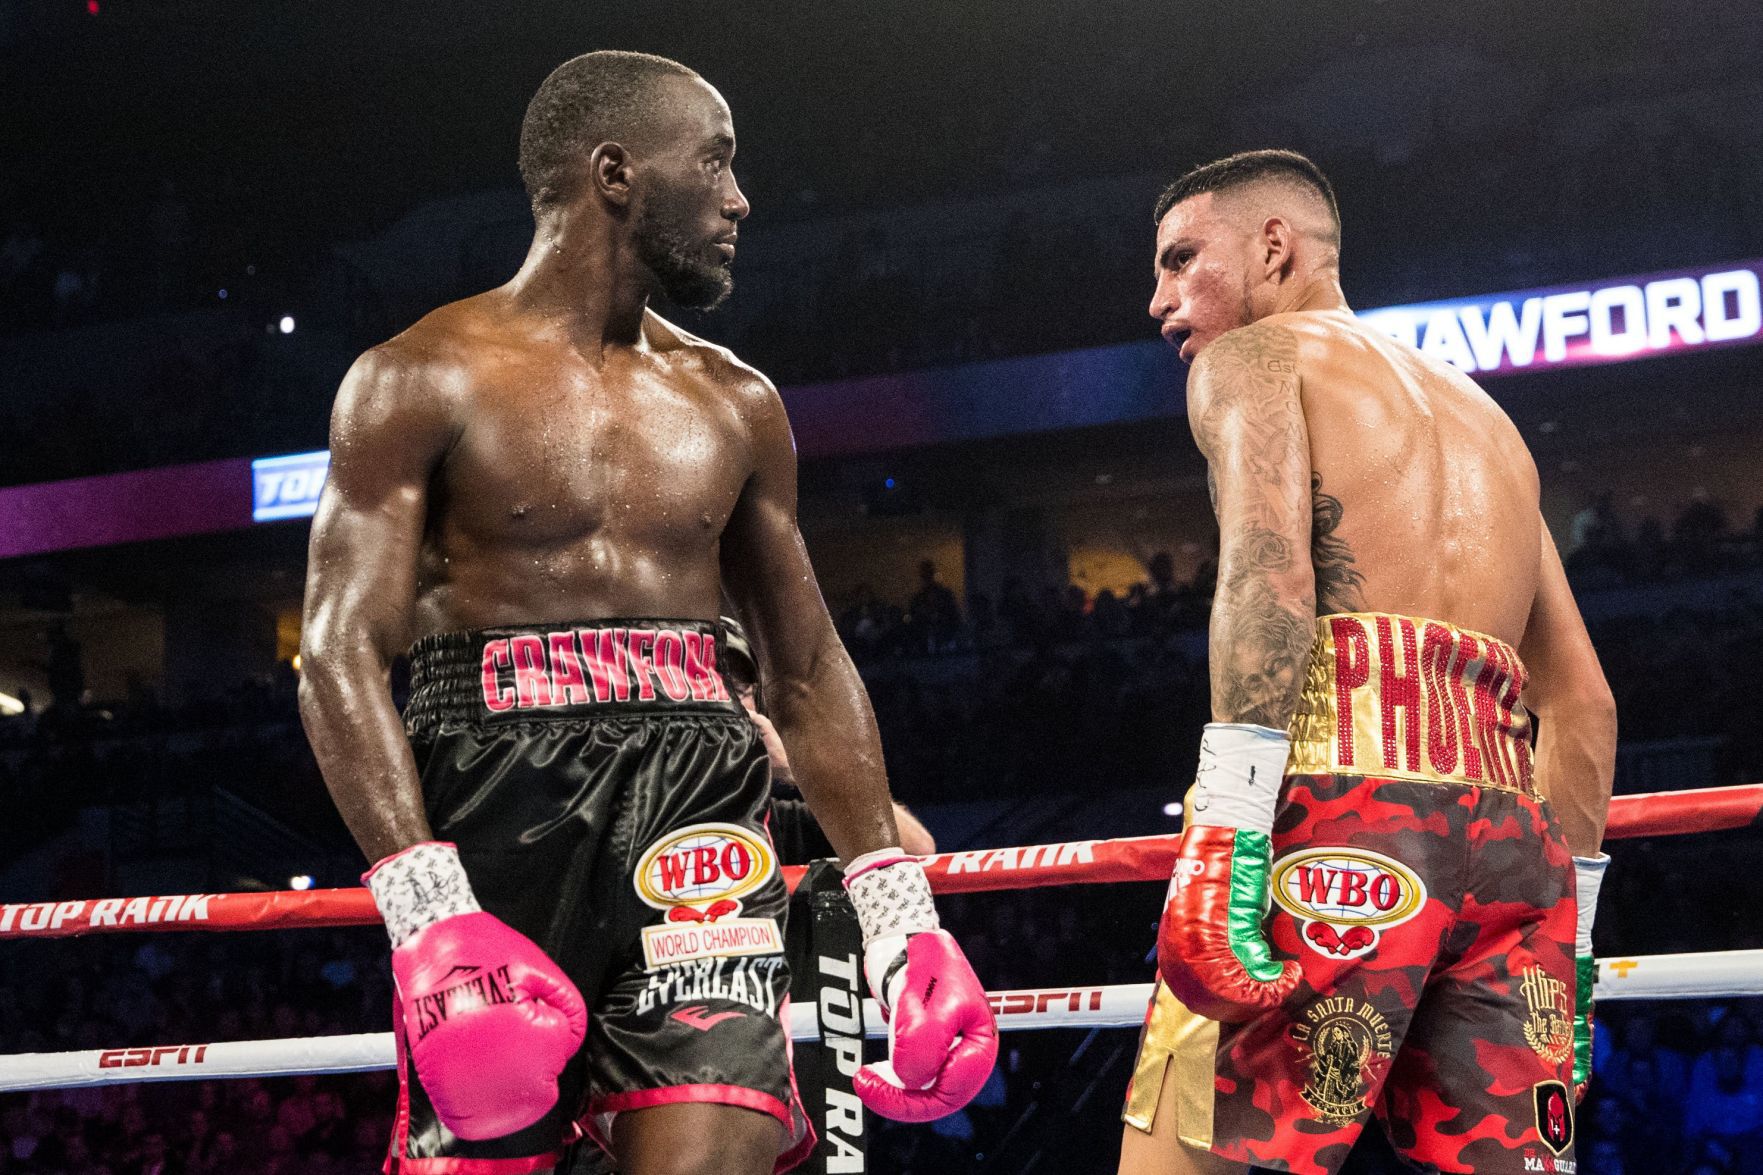 Undefeated Omaha boxer Bud Crawford says Amir Khan fight could push my career to the next level